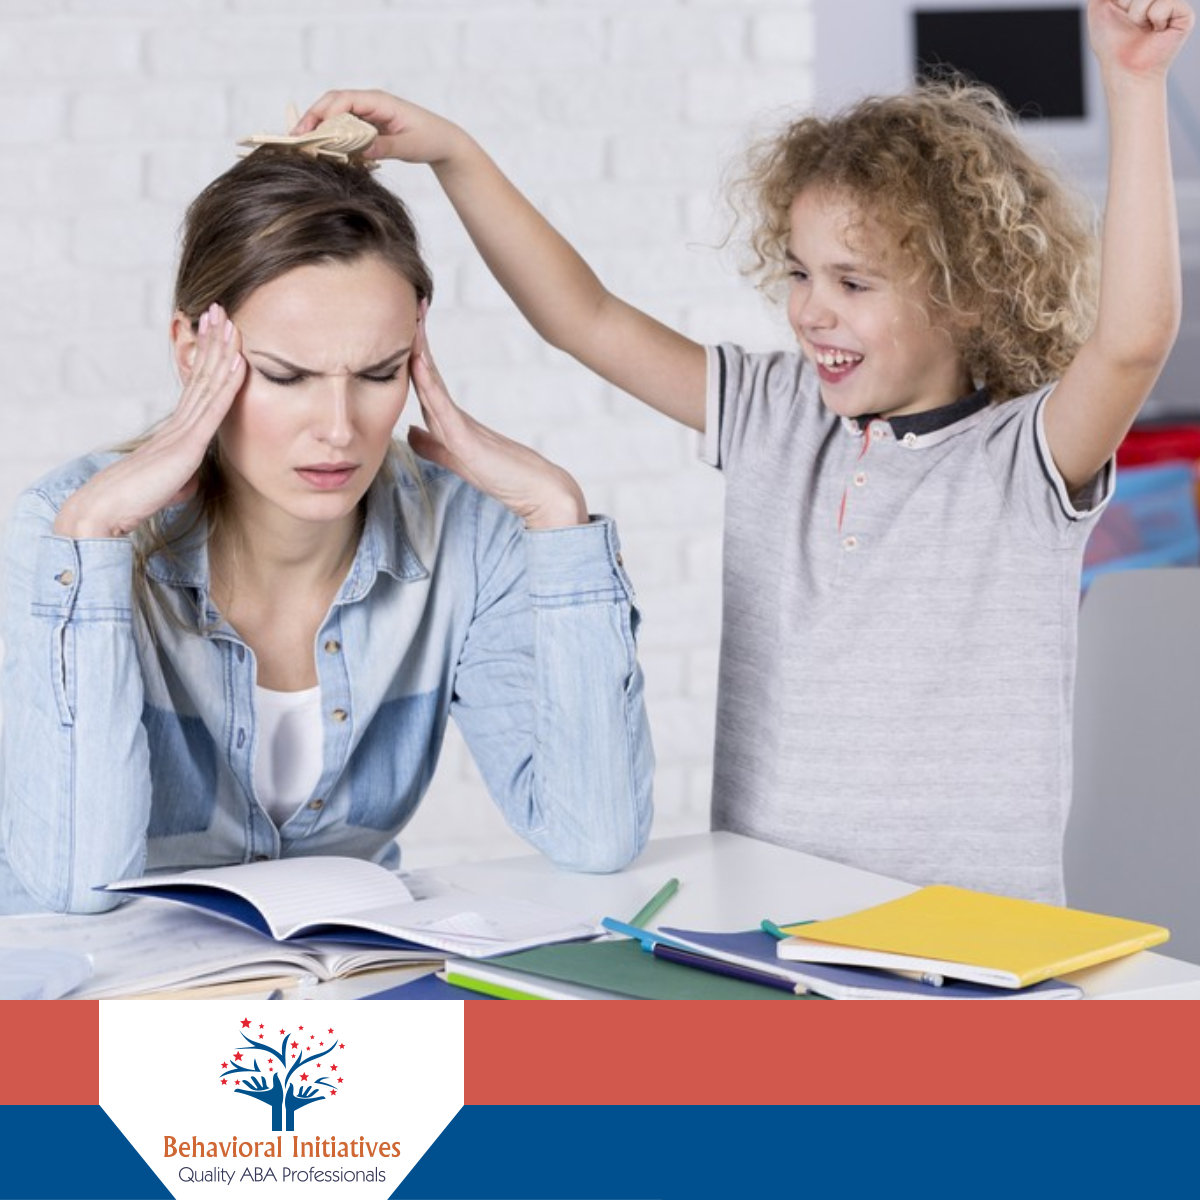 Managing Kids' Behavior

Managing their behaviors is not a strong suit for children. That is why they will need the guidance of their caregivers or parents. But, if you need further help with your child's behavior, you can contact us at 754-264-8779.

#KidsBehavior